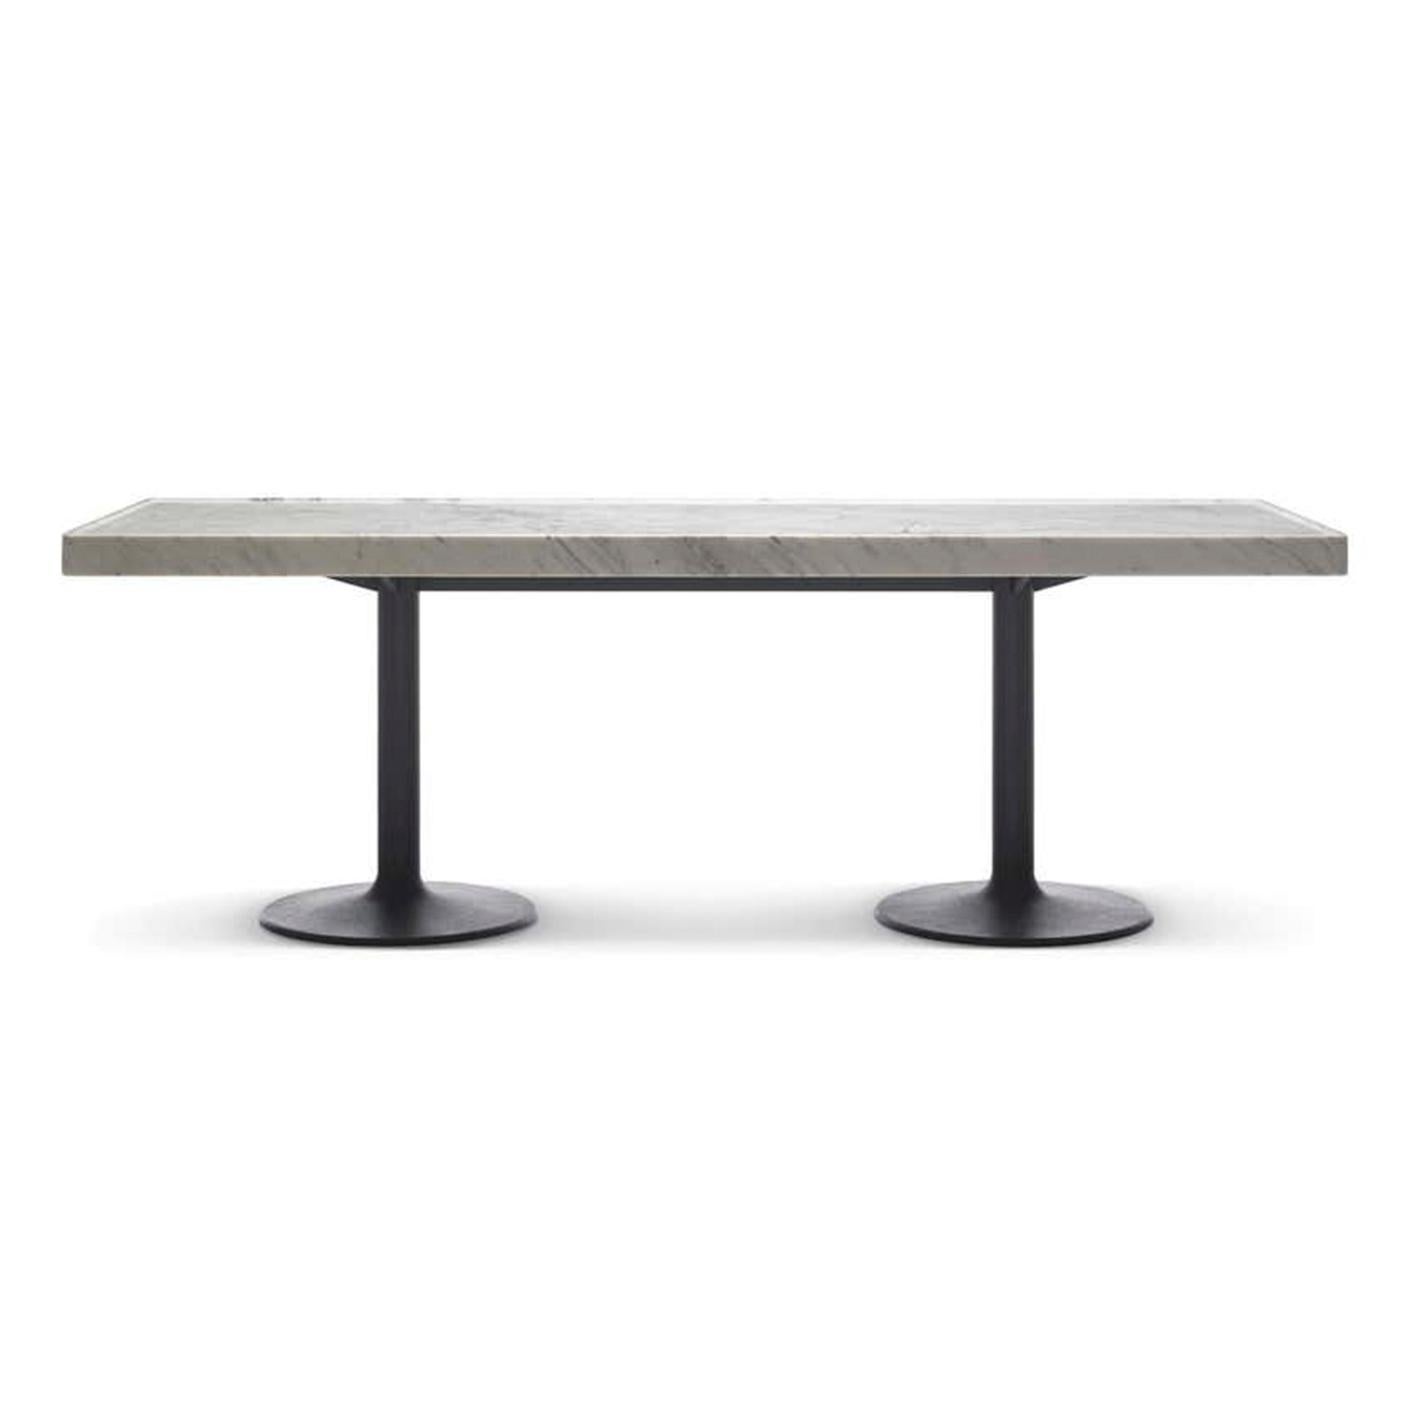 Italian Le Corbusier, P. Jeanneret, Charlotte Perriand LC11-P Marble Table by Cassina